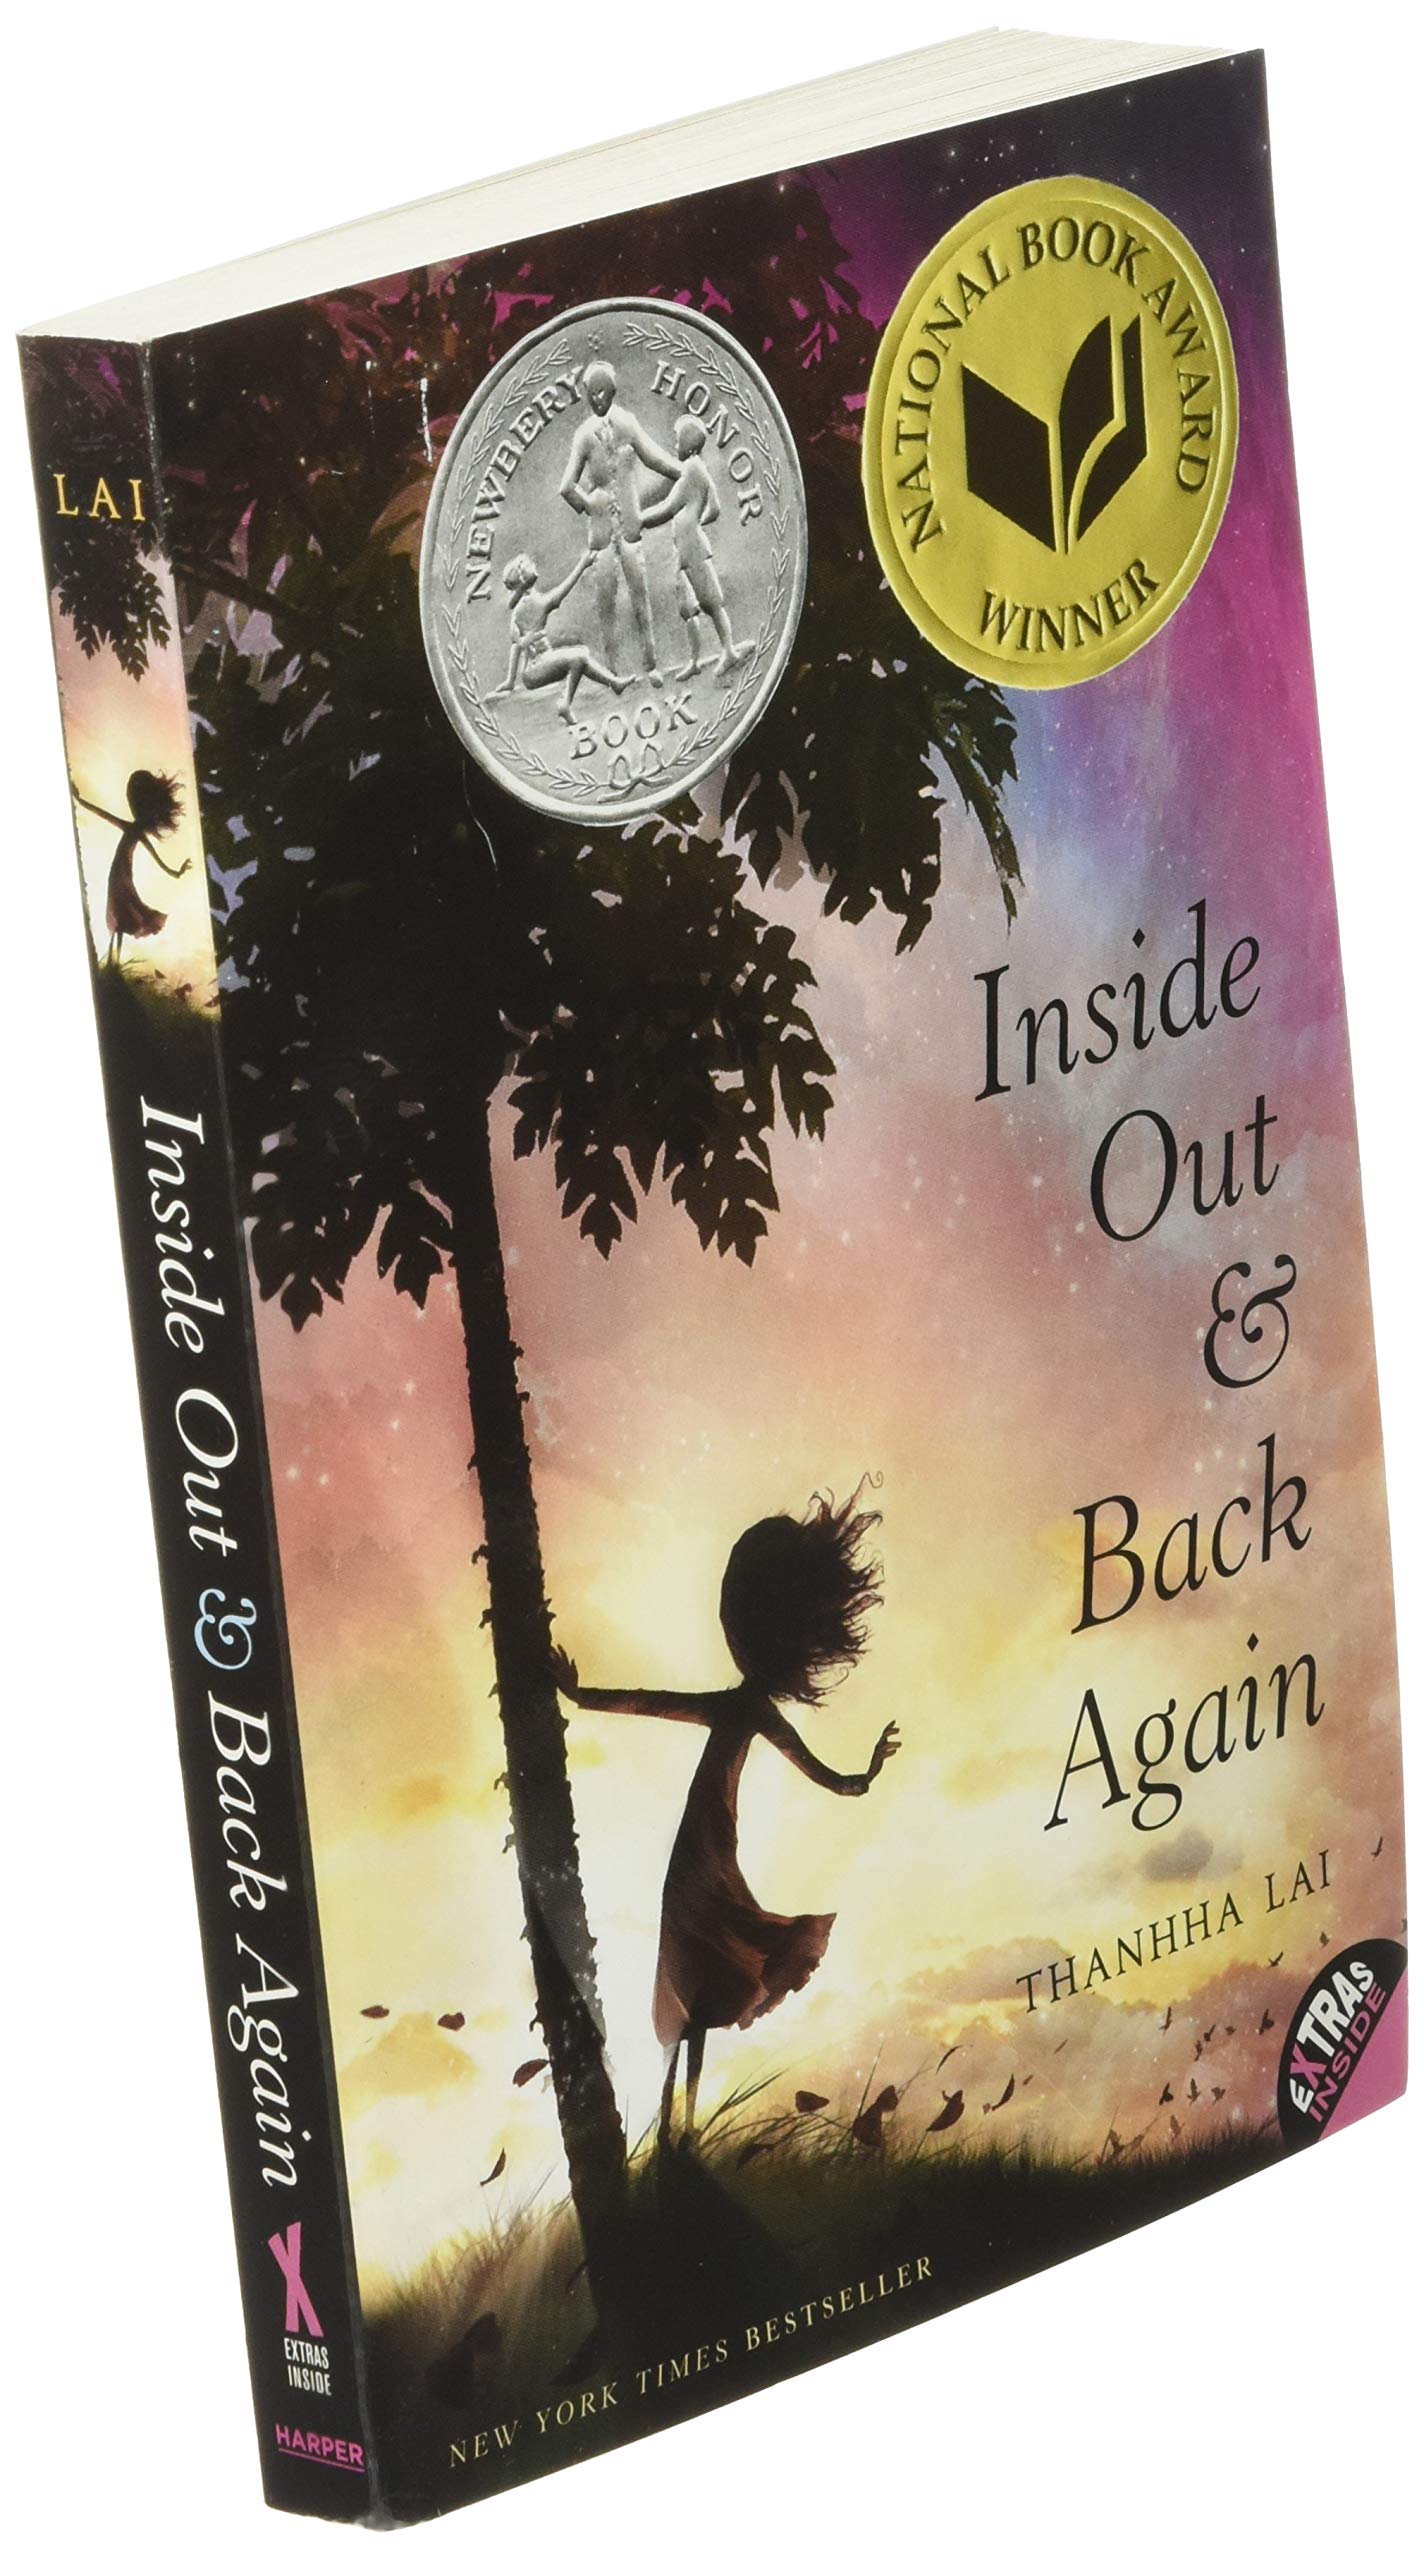 (Paperback)　Award　A　Again:　Back　and　Honor　Inside　Winner　Out　Newbery